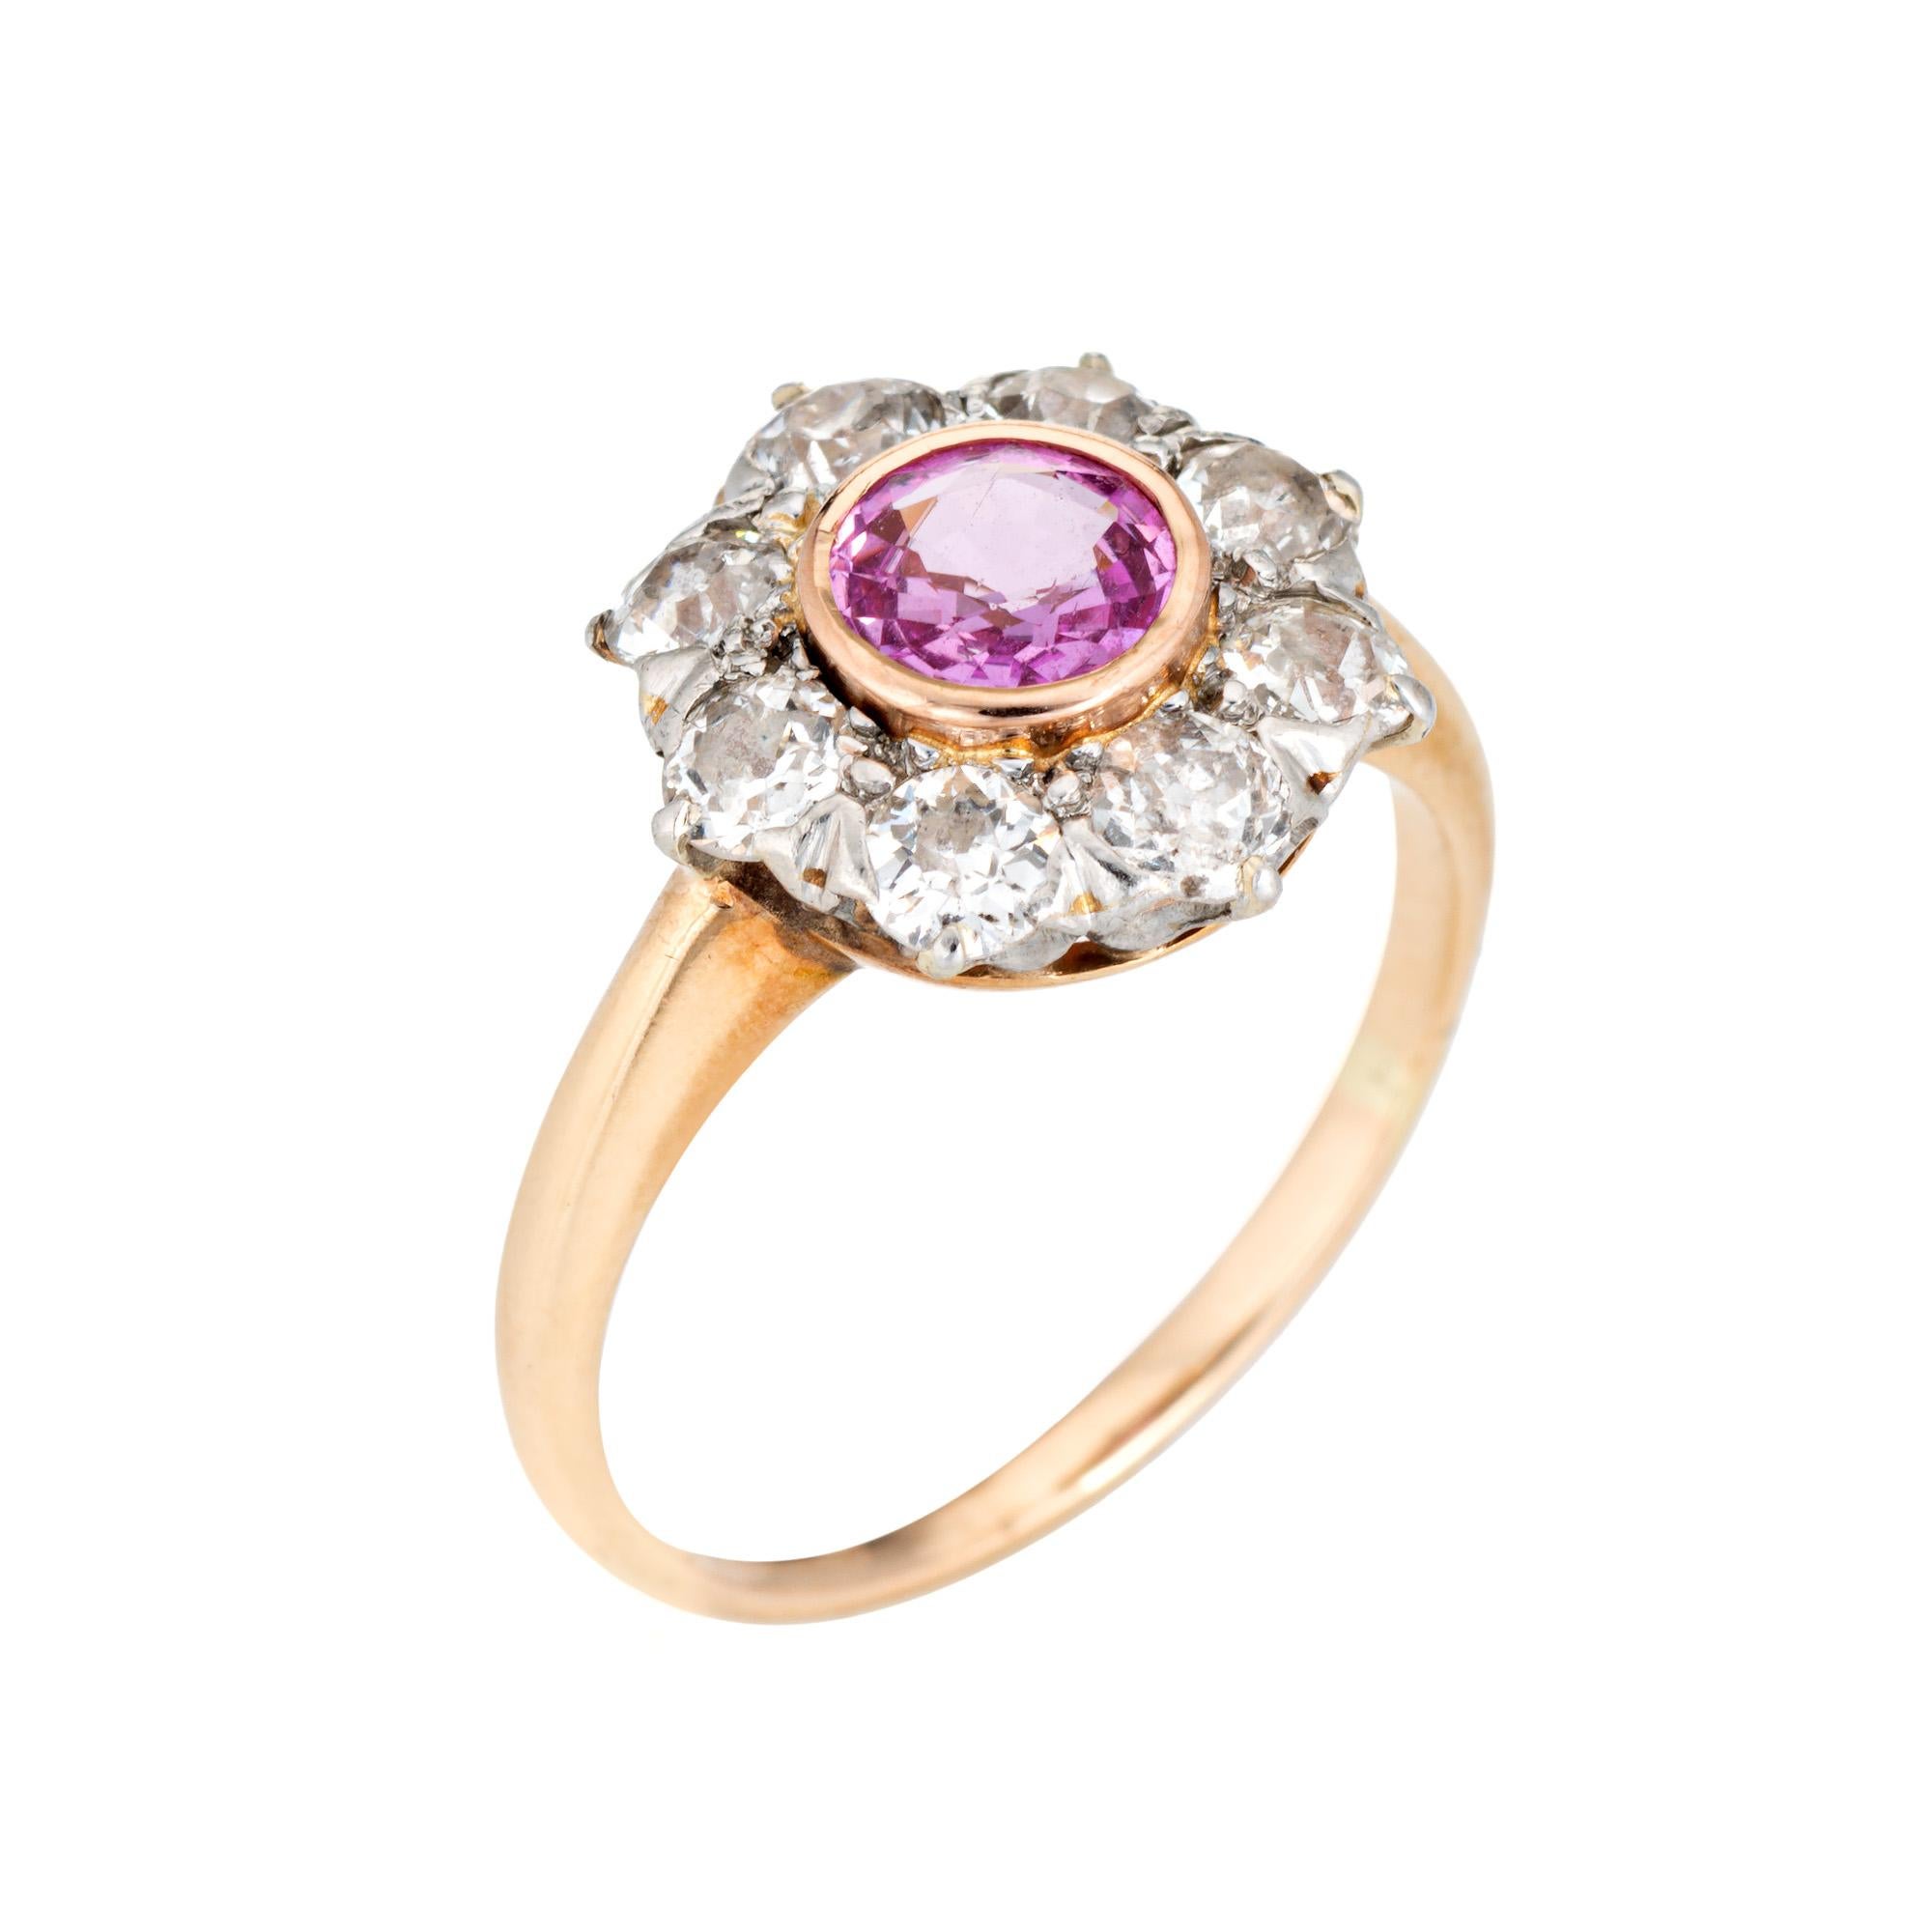 Stylish antique Edwardian pink sapphire & diamond cluster ring crafted in 14k yellow gold (circa 1900s to 1910s).
One center set pink sapphire is estimated at 0.50 carats, accented with eight estimated 0.15 carat old mine cut diamonds. The total